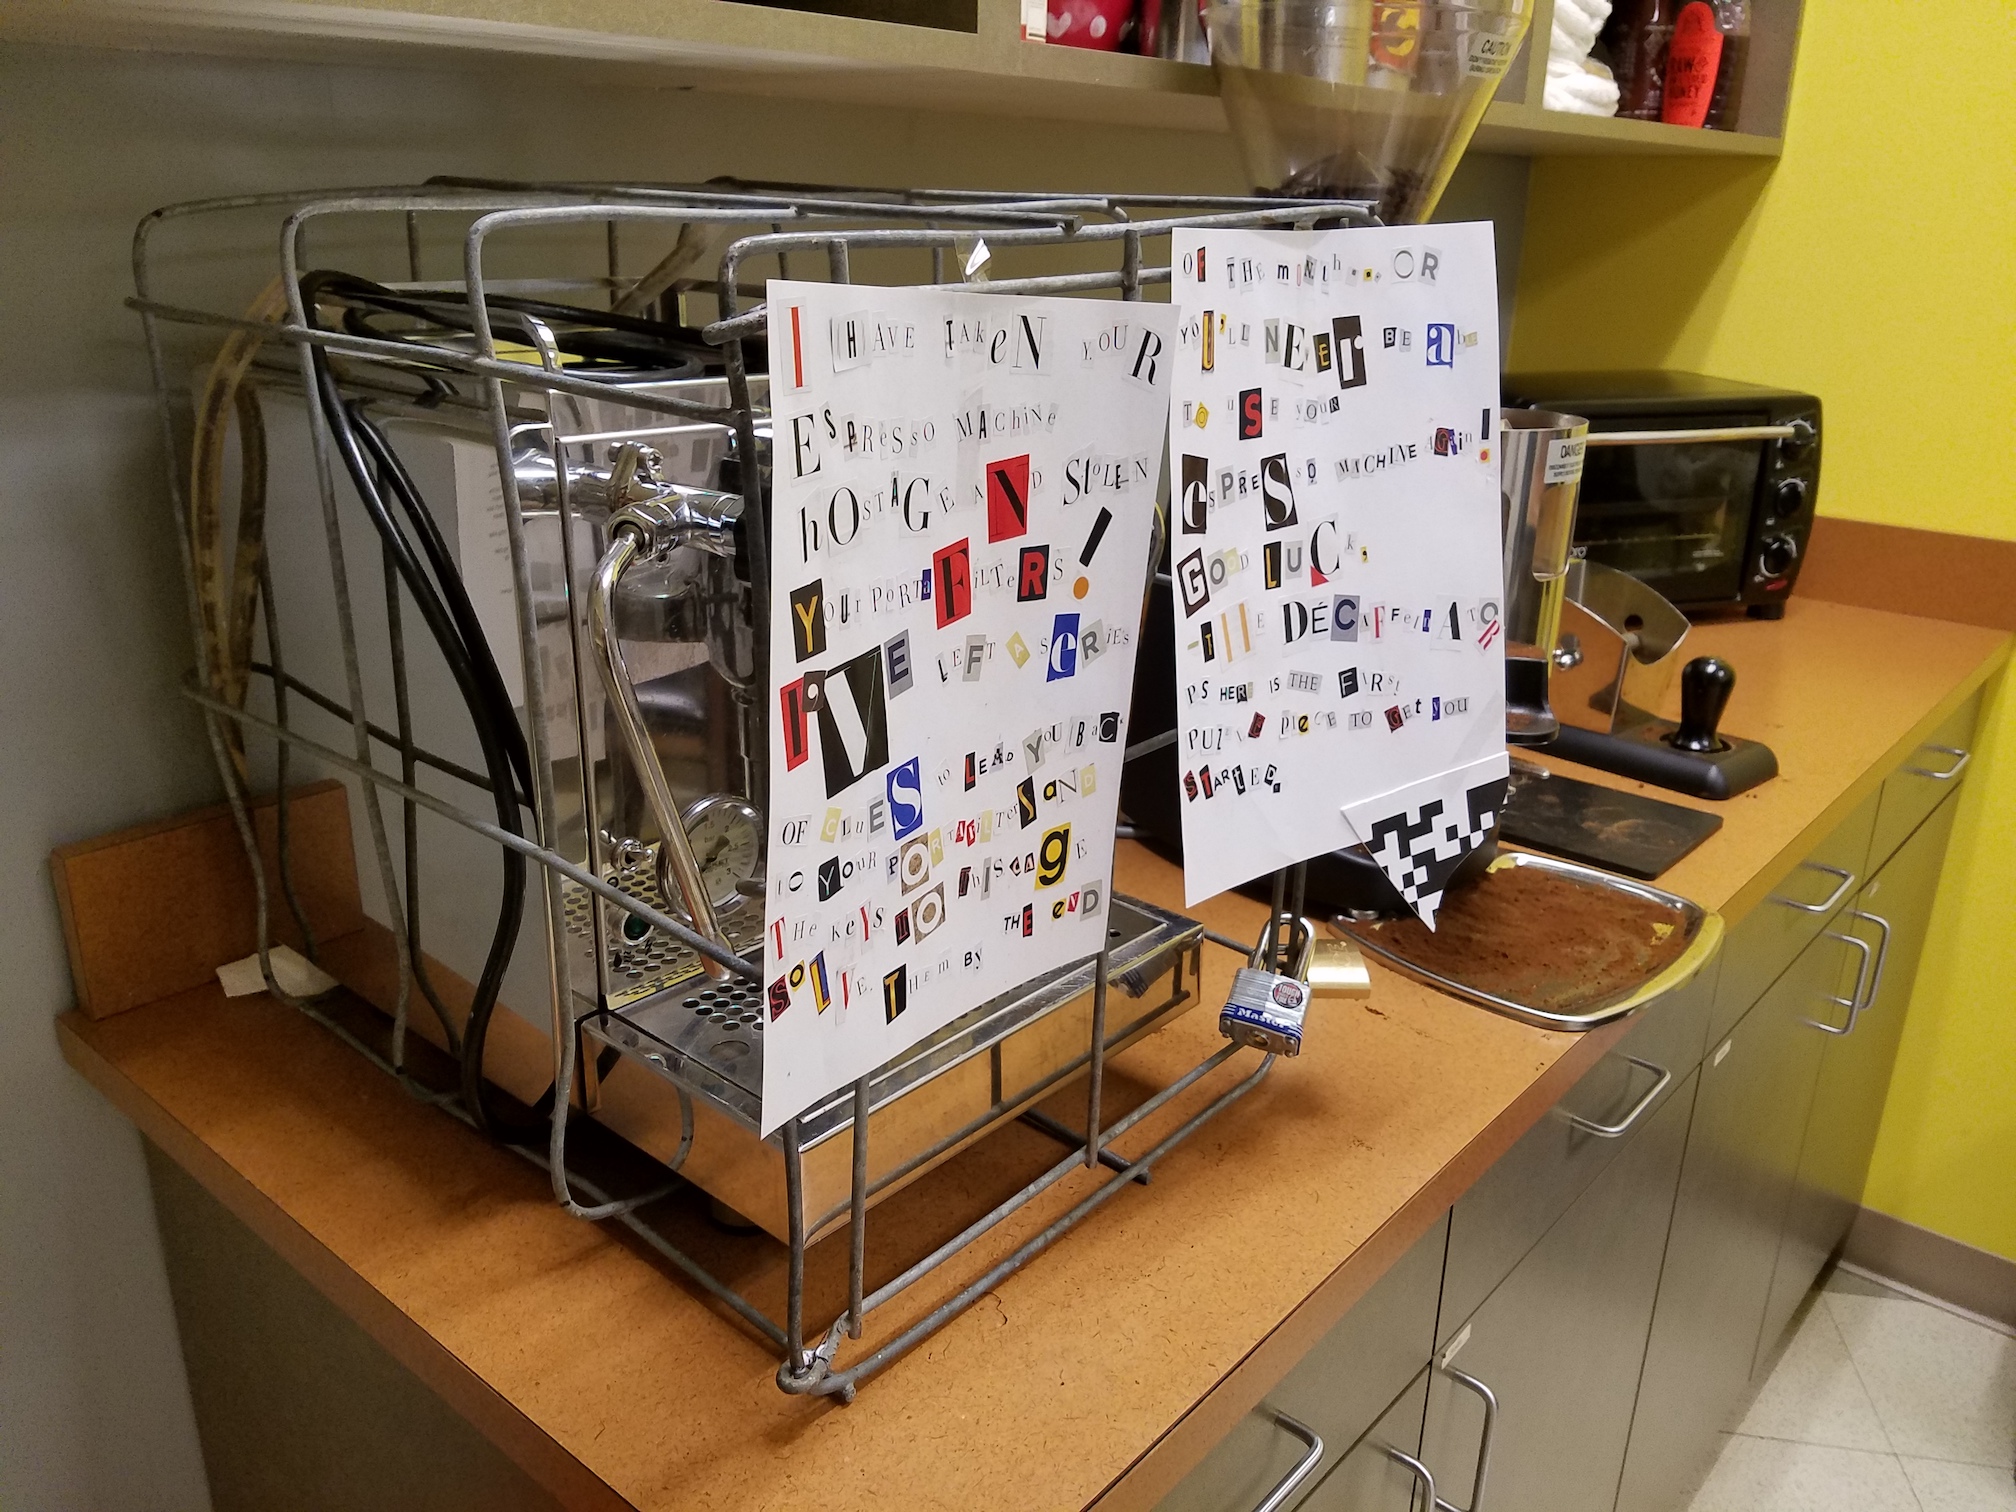 Espresso machine in a metal cage with multiple padlocks. A ransom note made of magazine clippings, and a fragment of a QR code, are taped to the front.